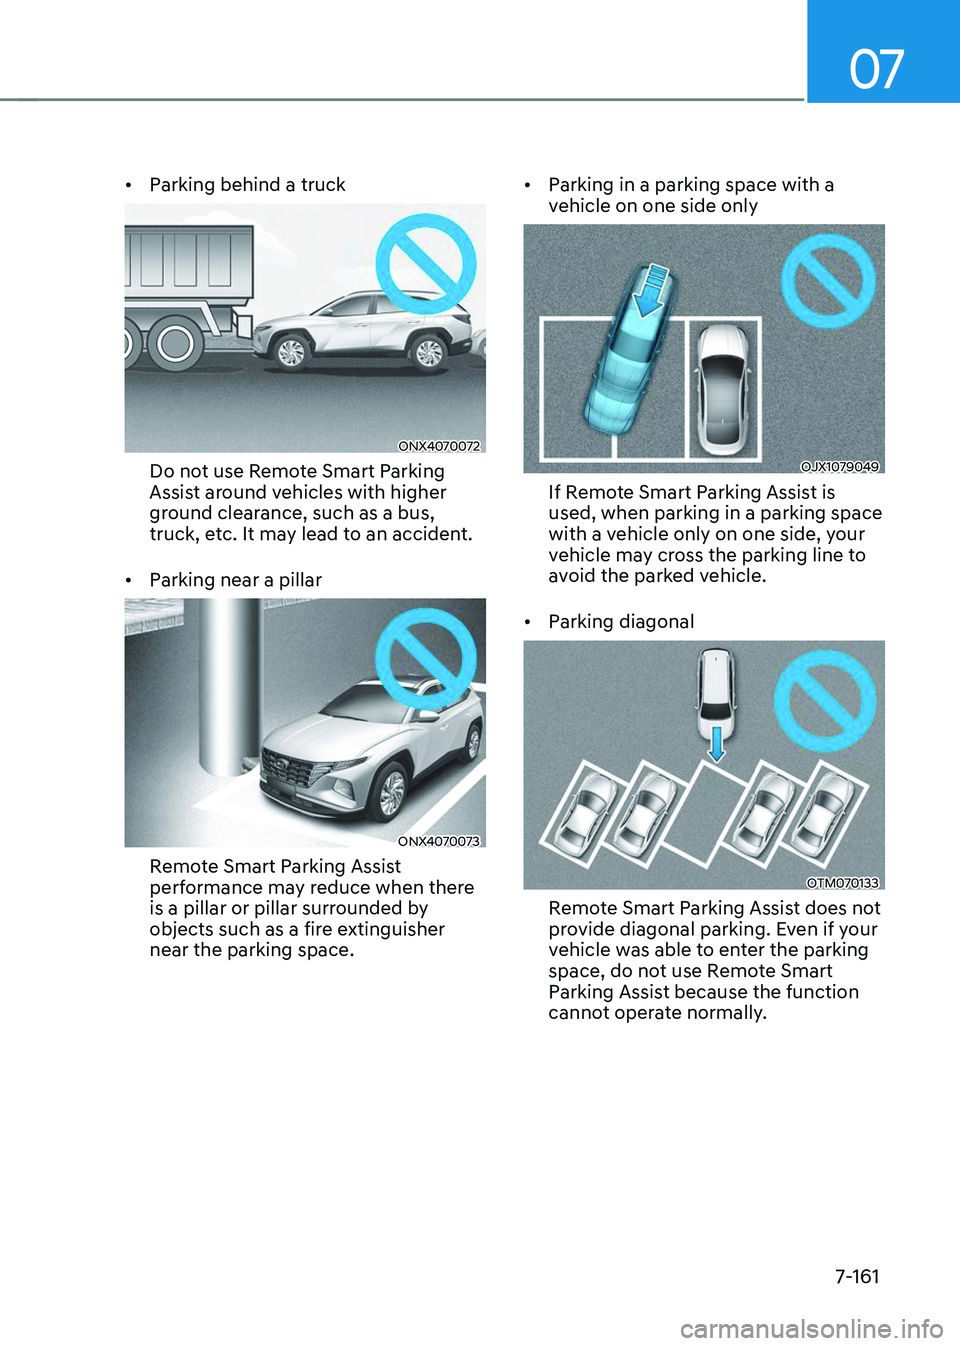 HYUNDAI TUCSON 2023  Owners Manual 07
7-161
•	Parking behind a truck
ONX4070072
Do not use Remote Smart Parking 
Assist around vehicles with higher 
ground clearance, such as a bus, 
truck, etc. It may lead to an accident. 
•	 Park